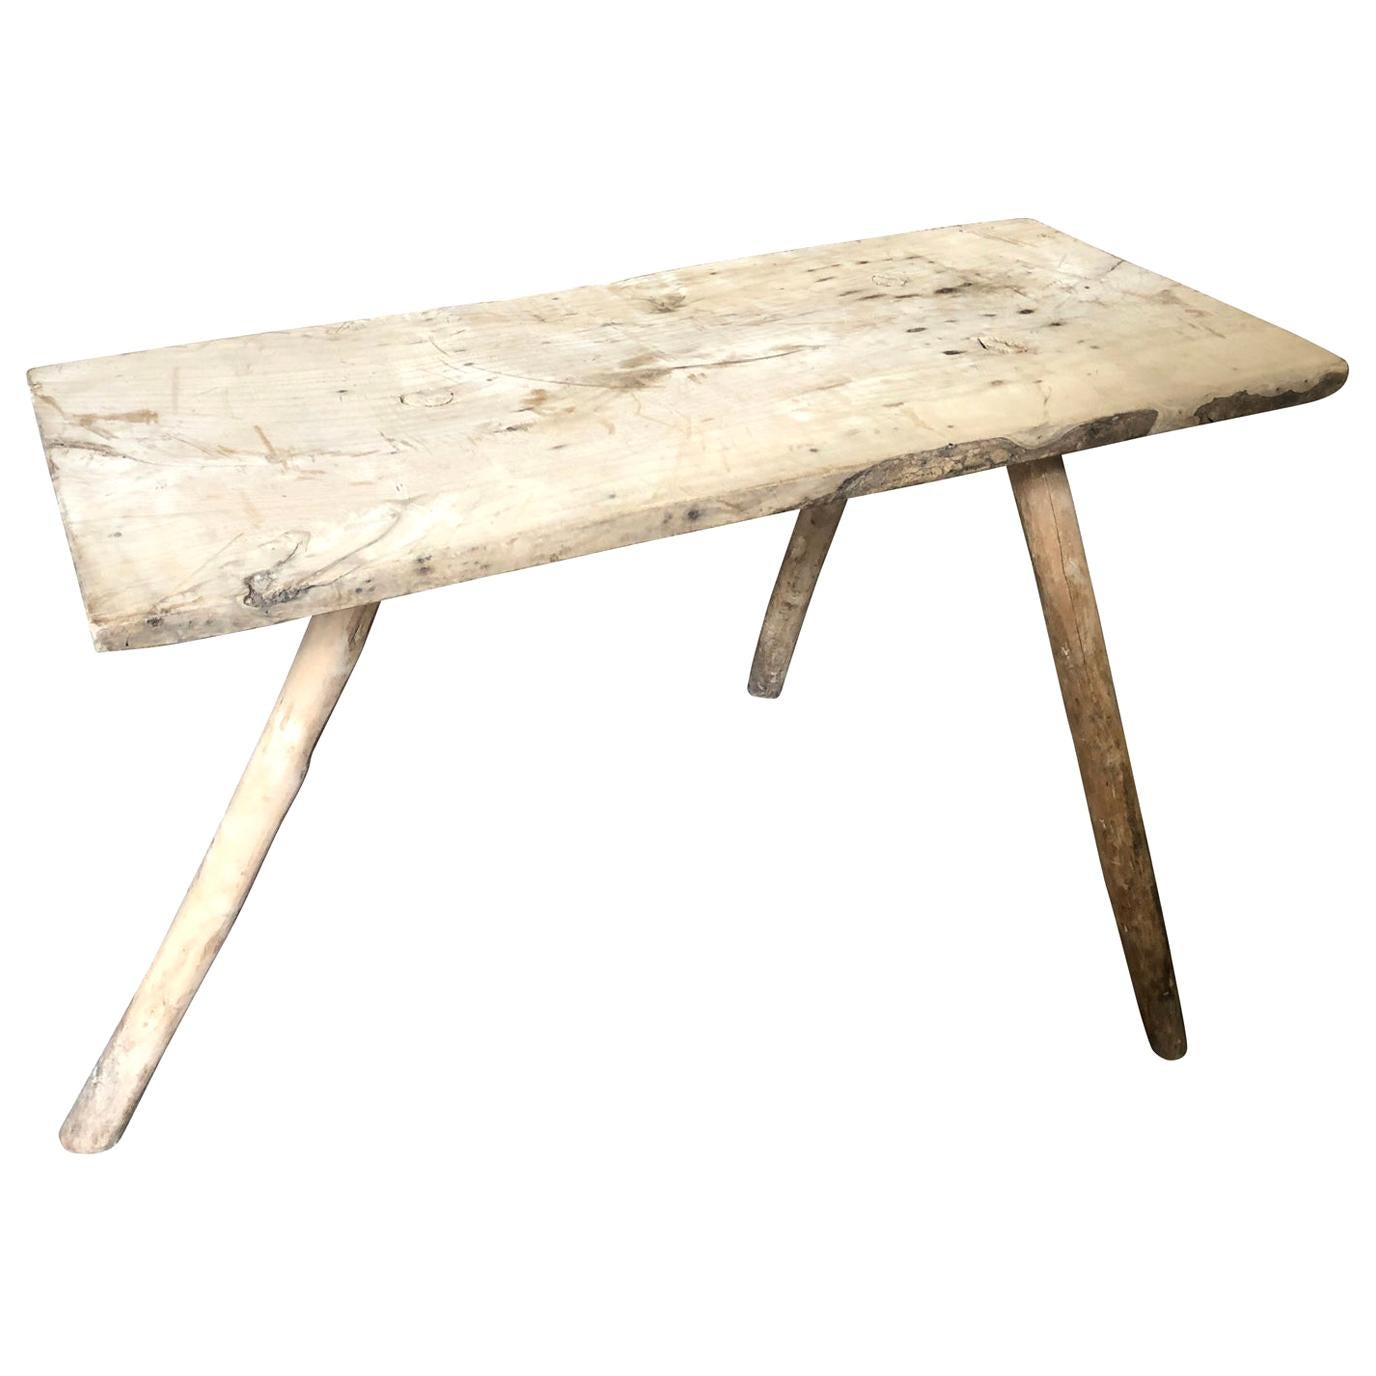 Spanish 18th Century Primitive Side Table, Coffee Table